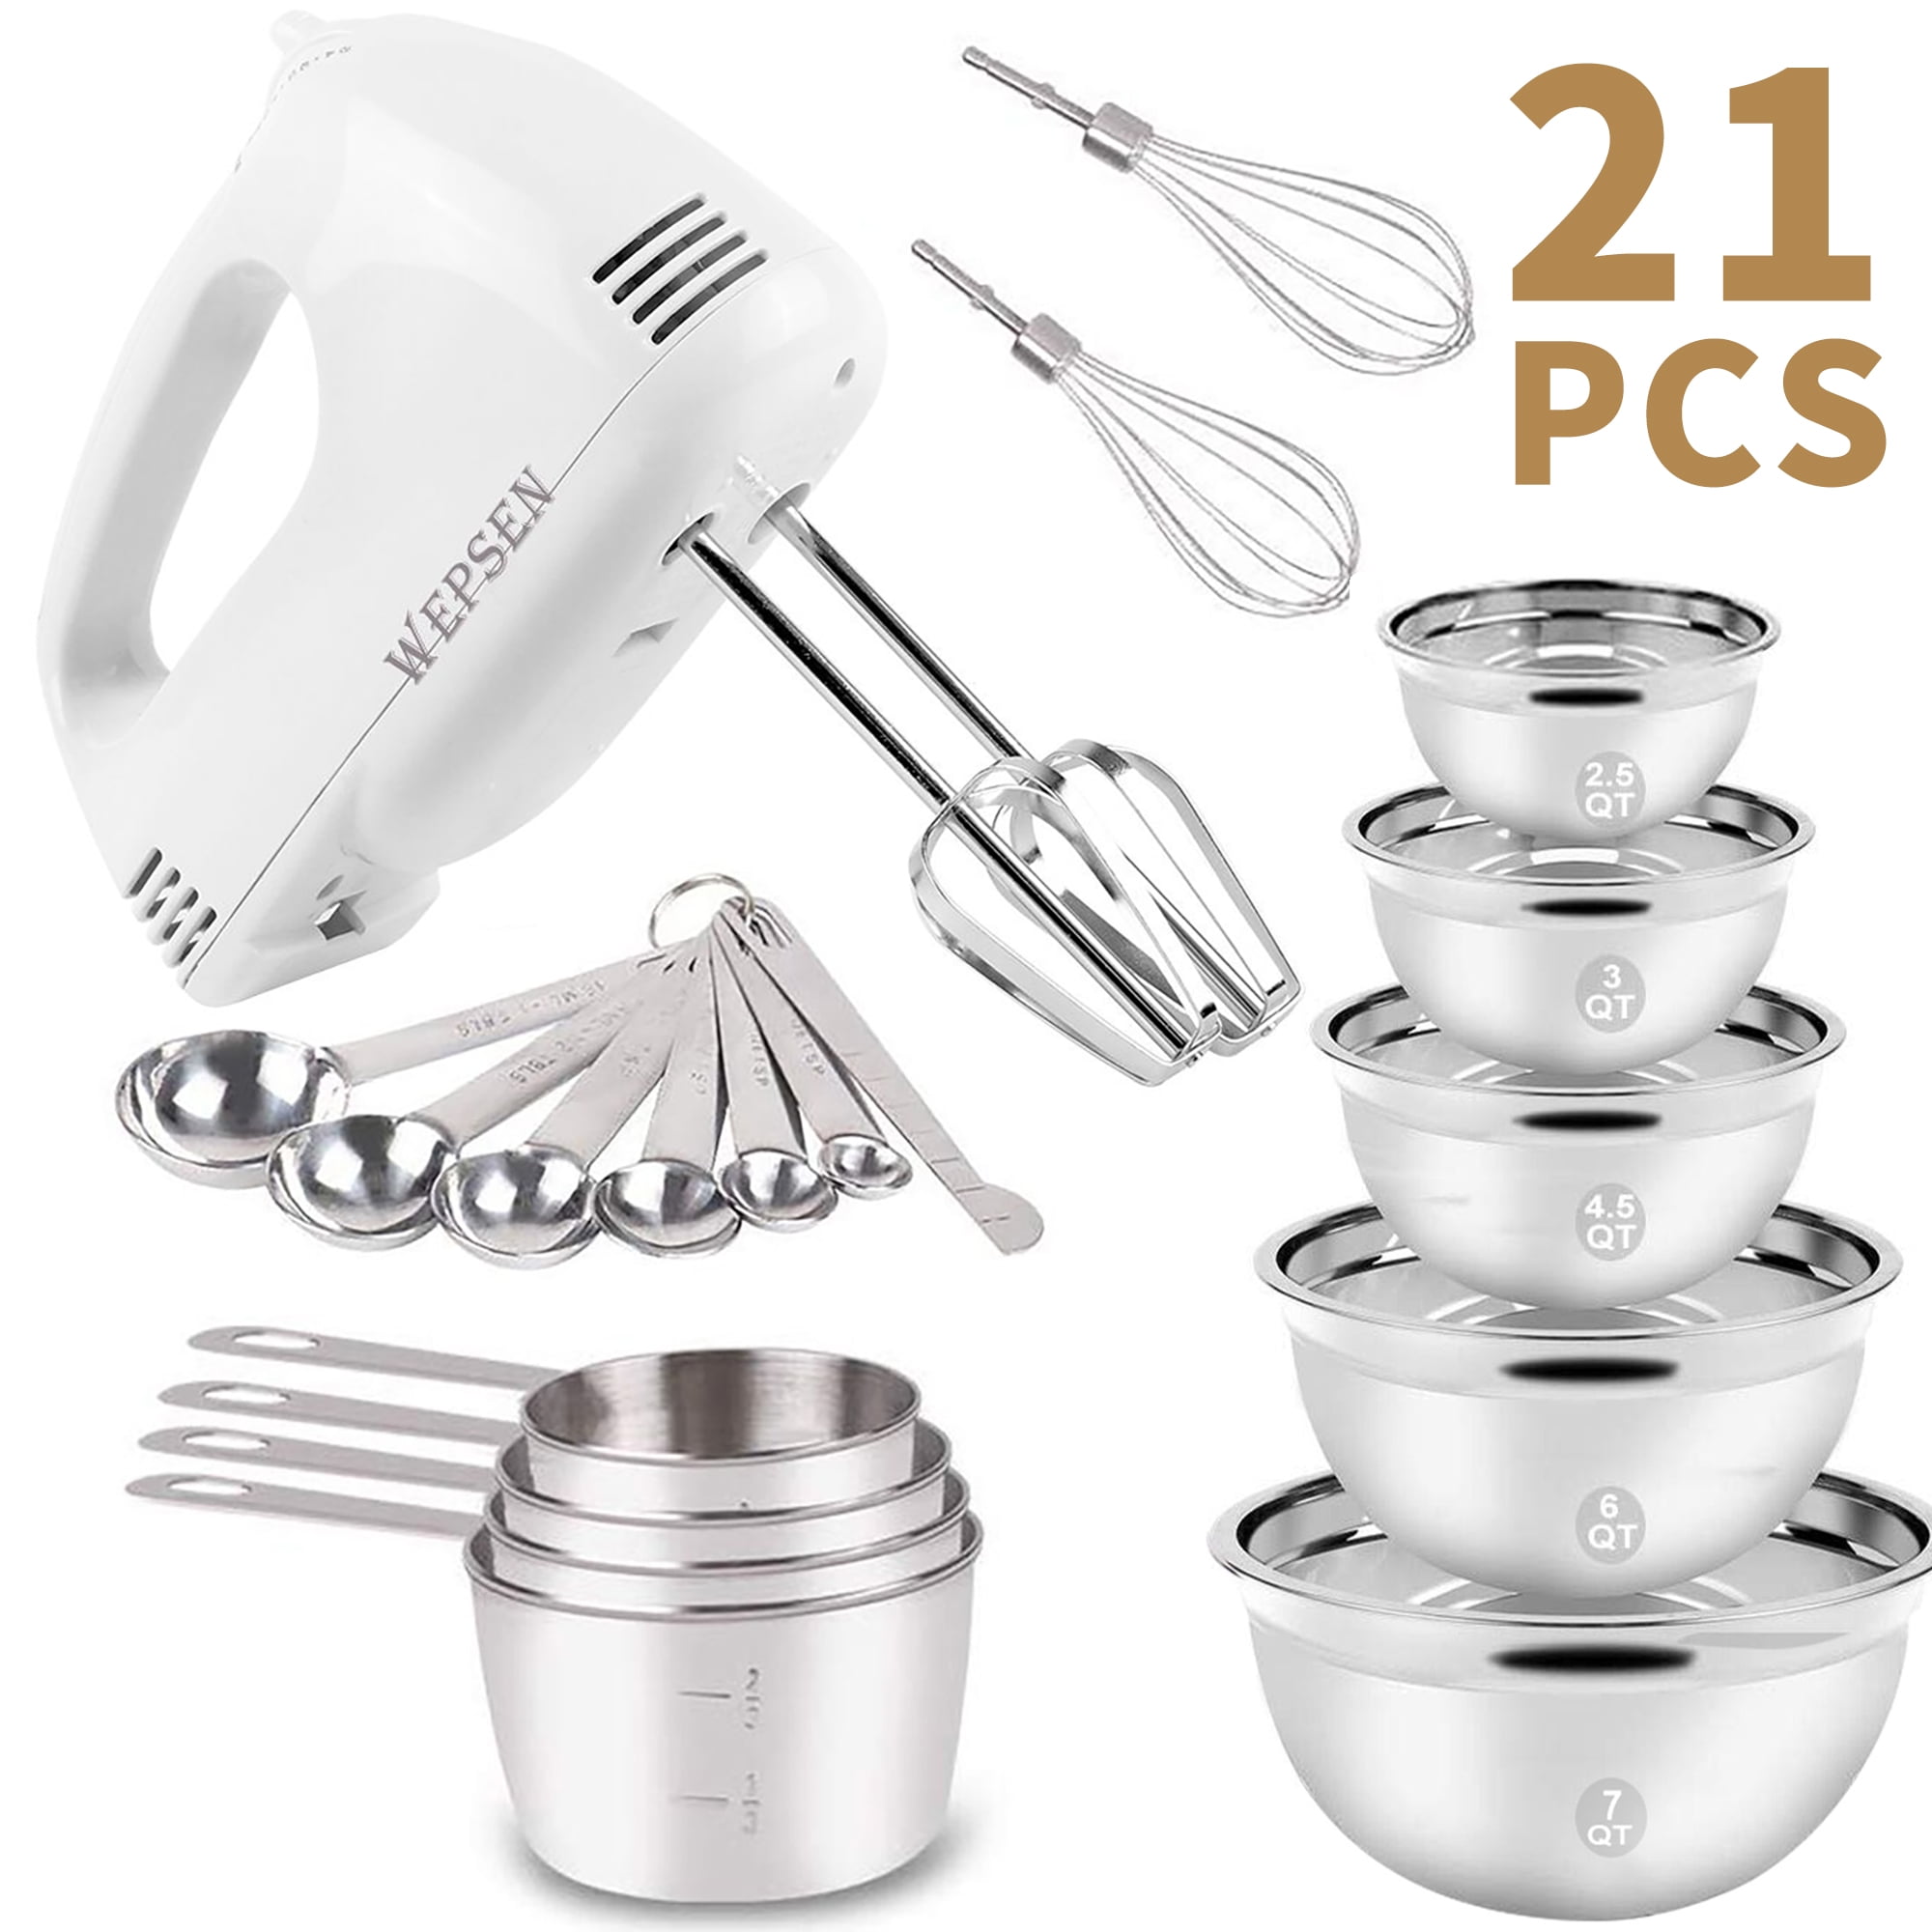  600W Electric Hand Mixer with 6 Piece Mixing Bowls with  Airtight Lids Set, Mixer Electric Handheld Stainless Steel Metal Nesting  Bowls Set for Kitchen Cooking Baking: Home & Kitchen